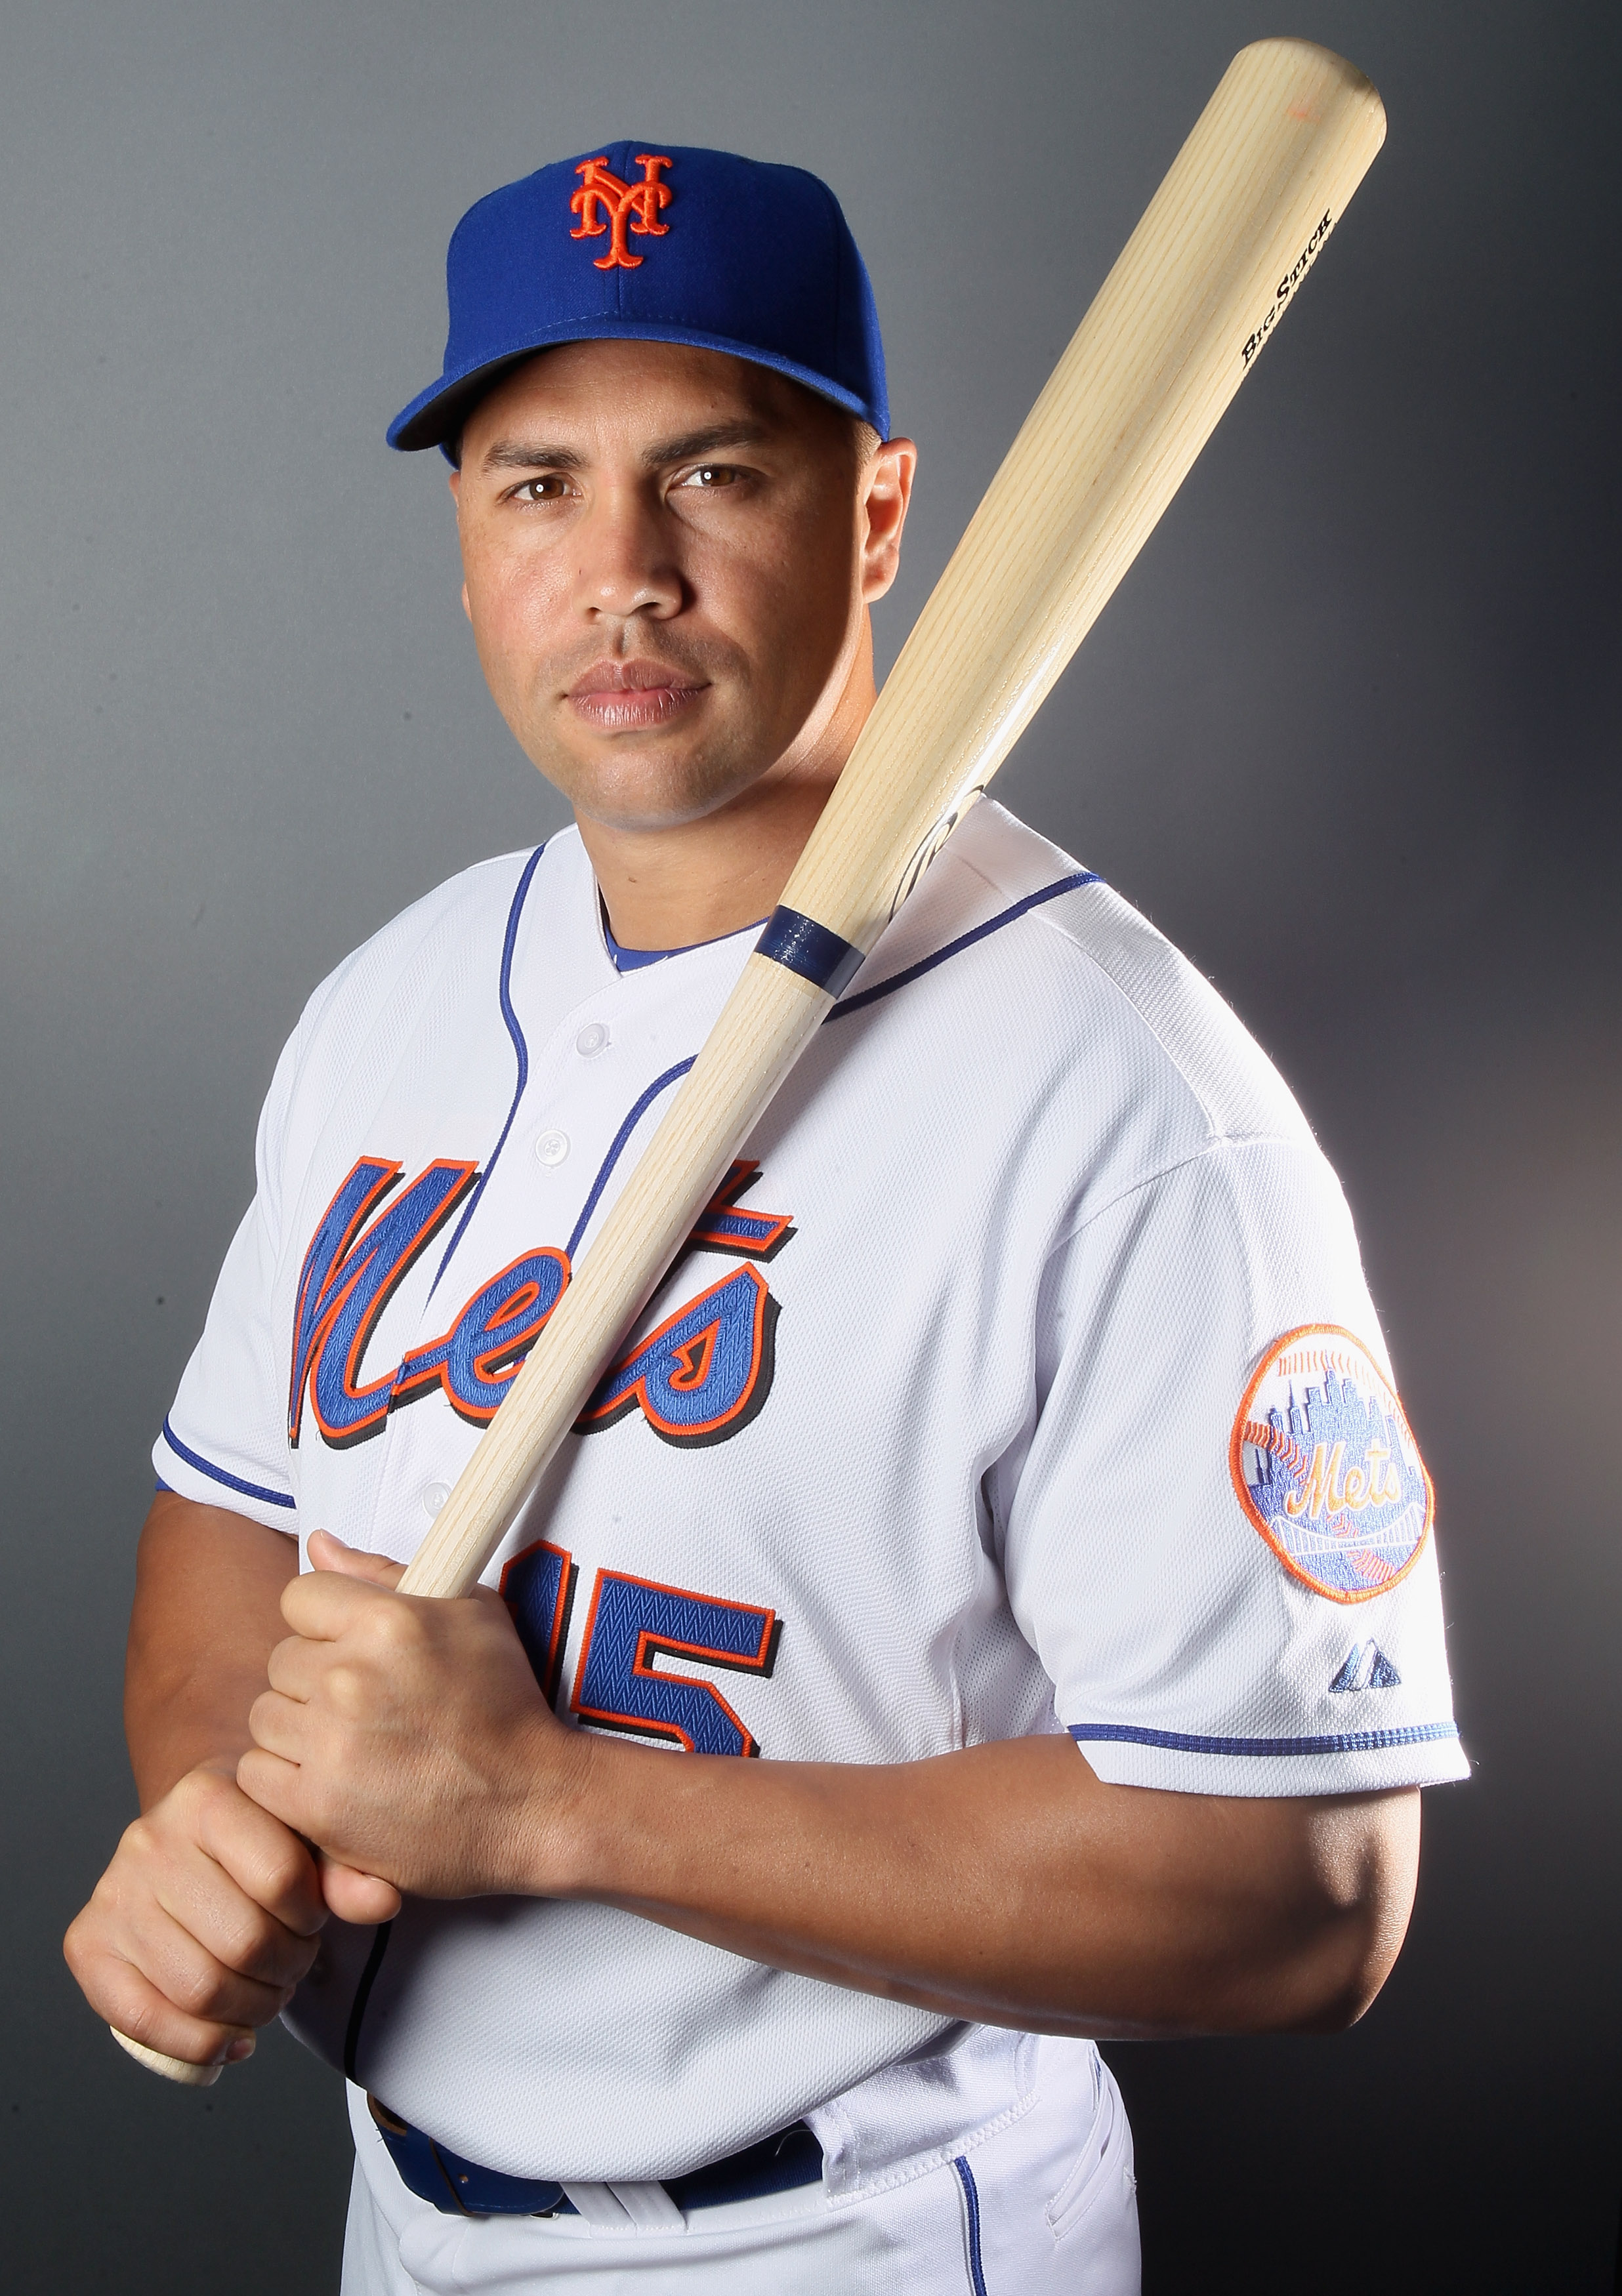 PORT ST. LUCIE, FL - FEBRUARY 24:  RY 24:  Carlos Beltran #15 of the New York Mets poses for a portrait during the New York Mets Photo Day on February 24, 2011 at Digital Domain Park in Port St. Lucie, Florida.  (Photo by Elsa/Getty Images)